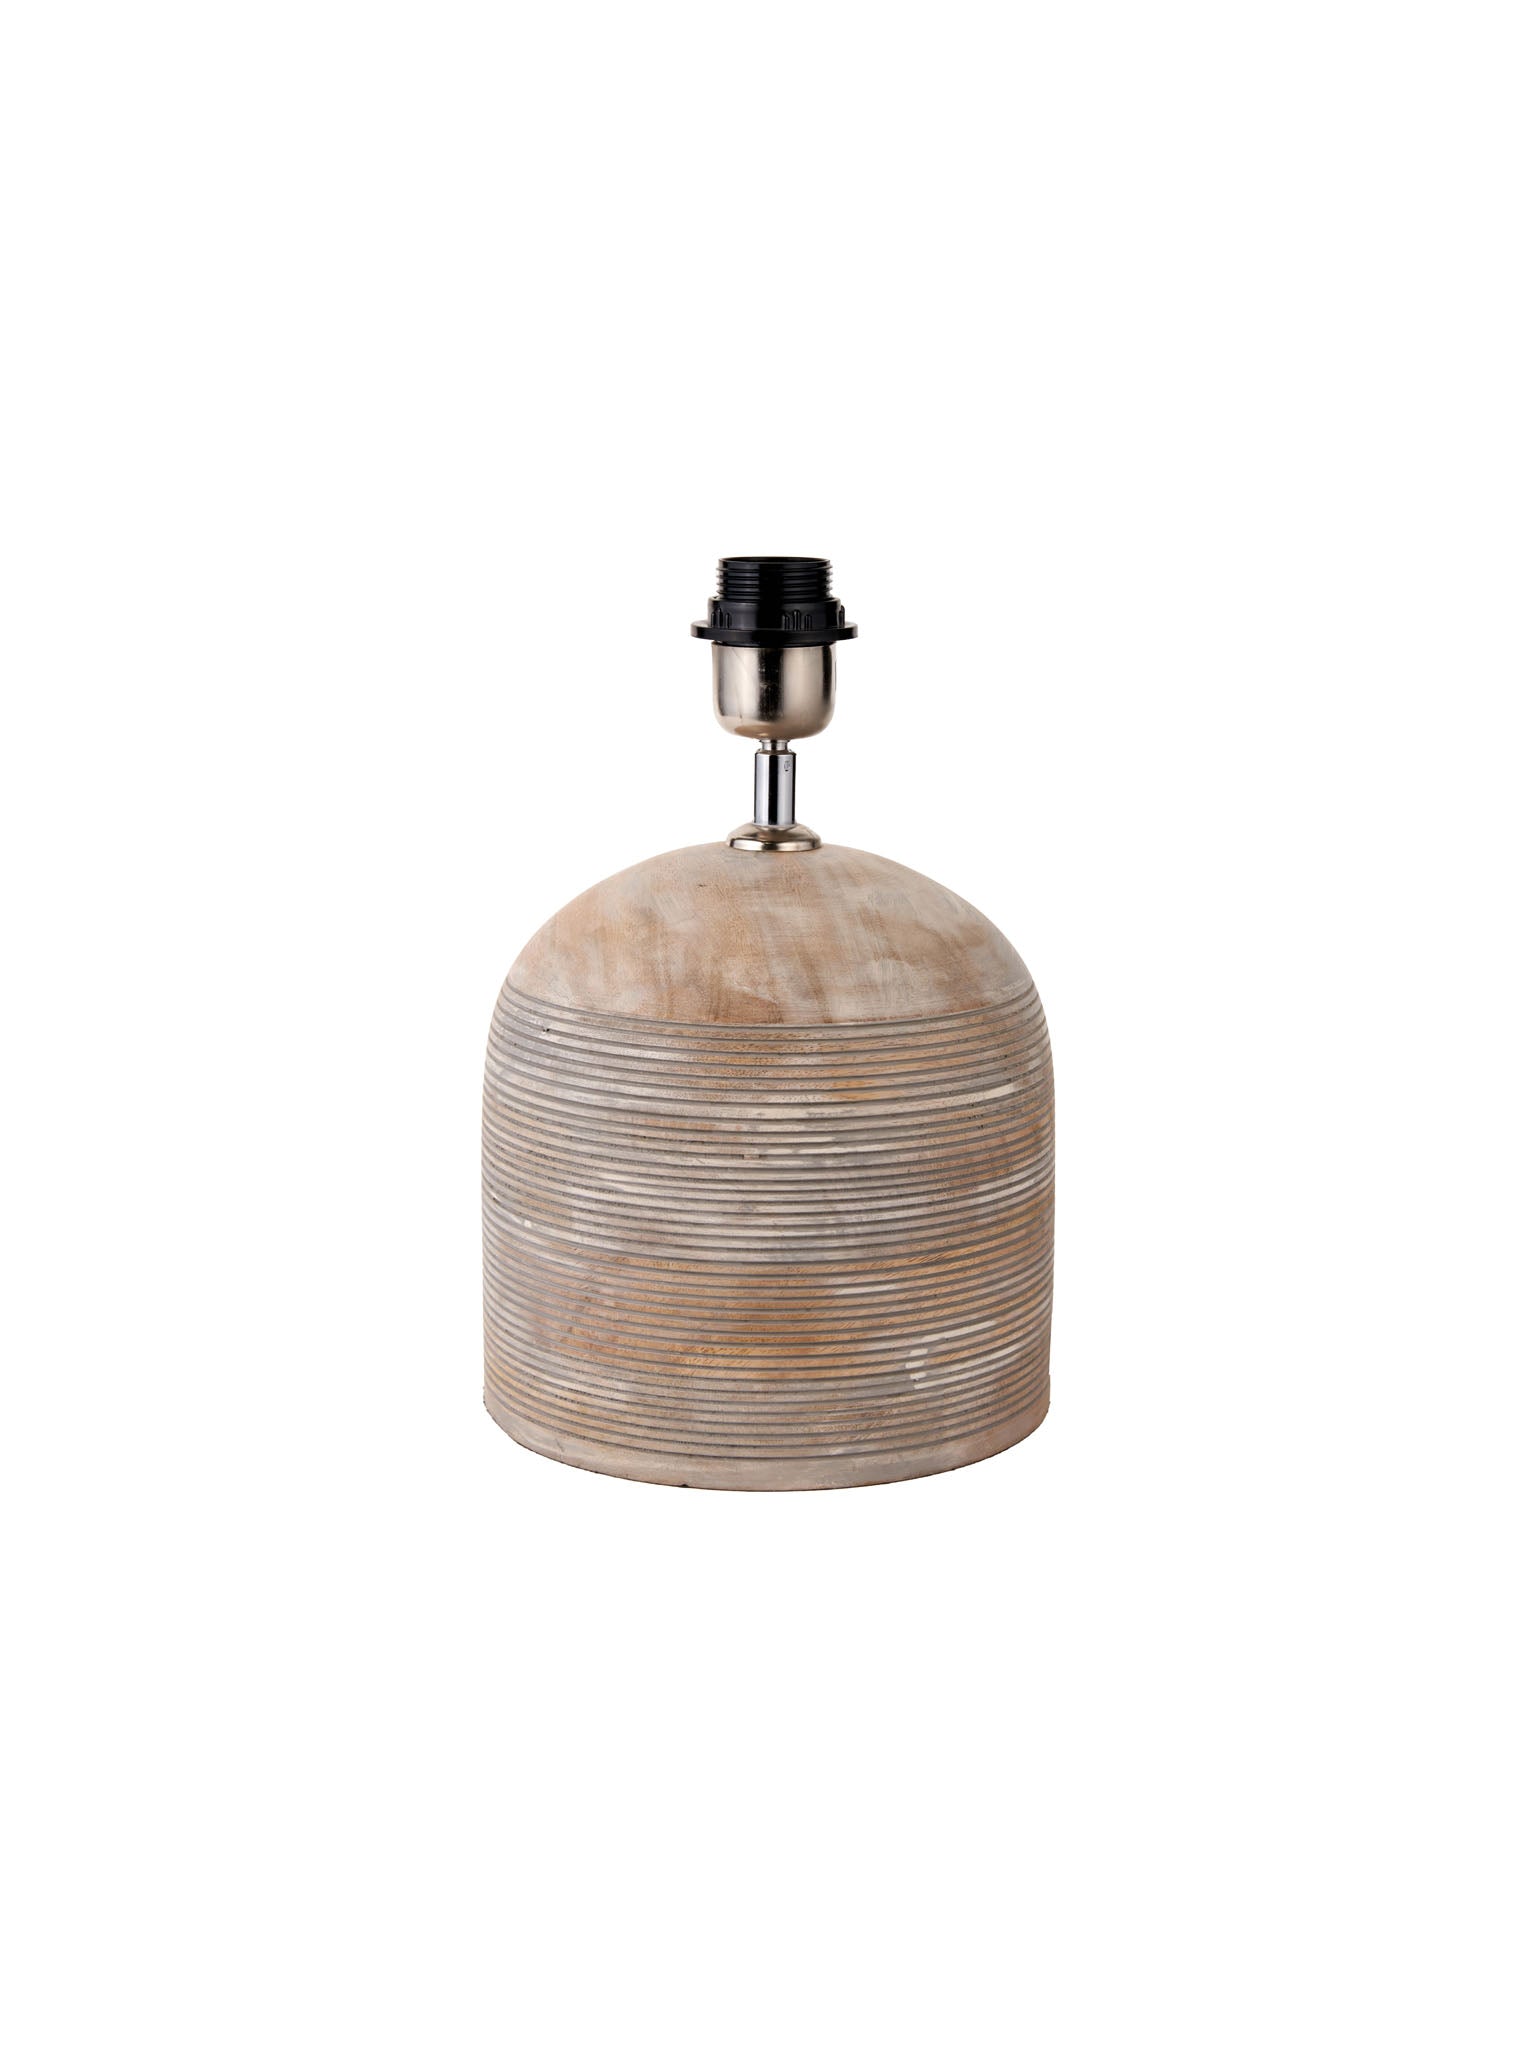 Jannu Wooden Grooved Table Lamp